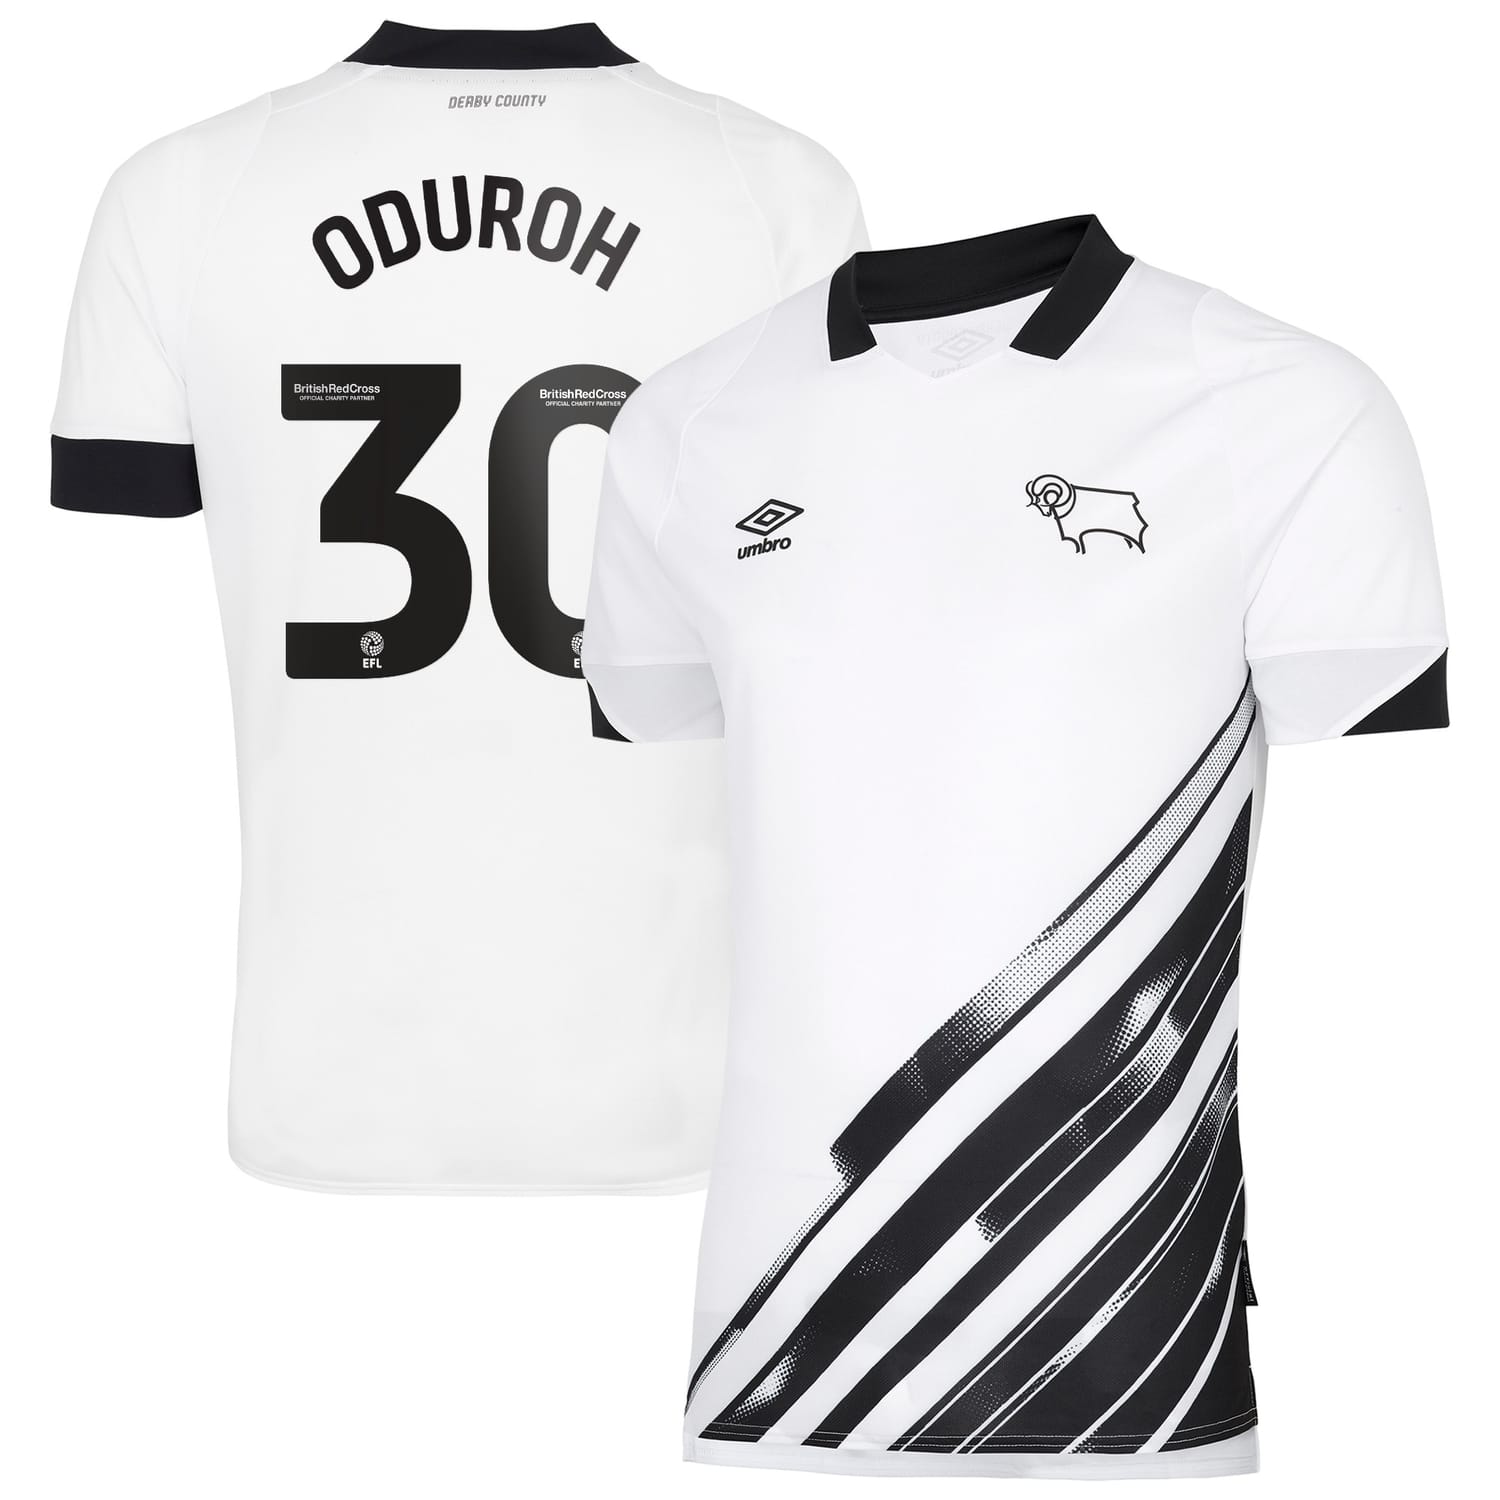 EFL League One Derby County Home Jersey Shirt 2022-23 player Oduroh 30 printing for Men